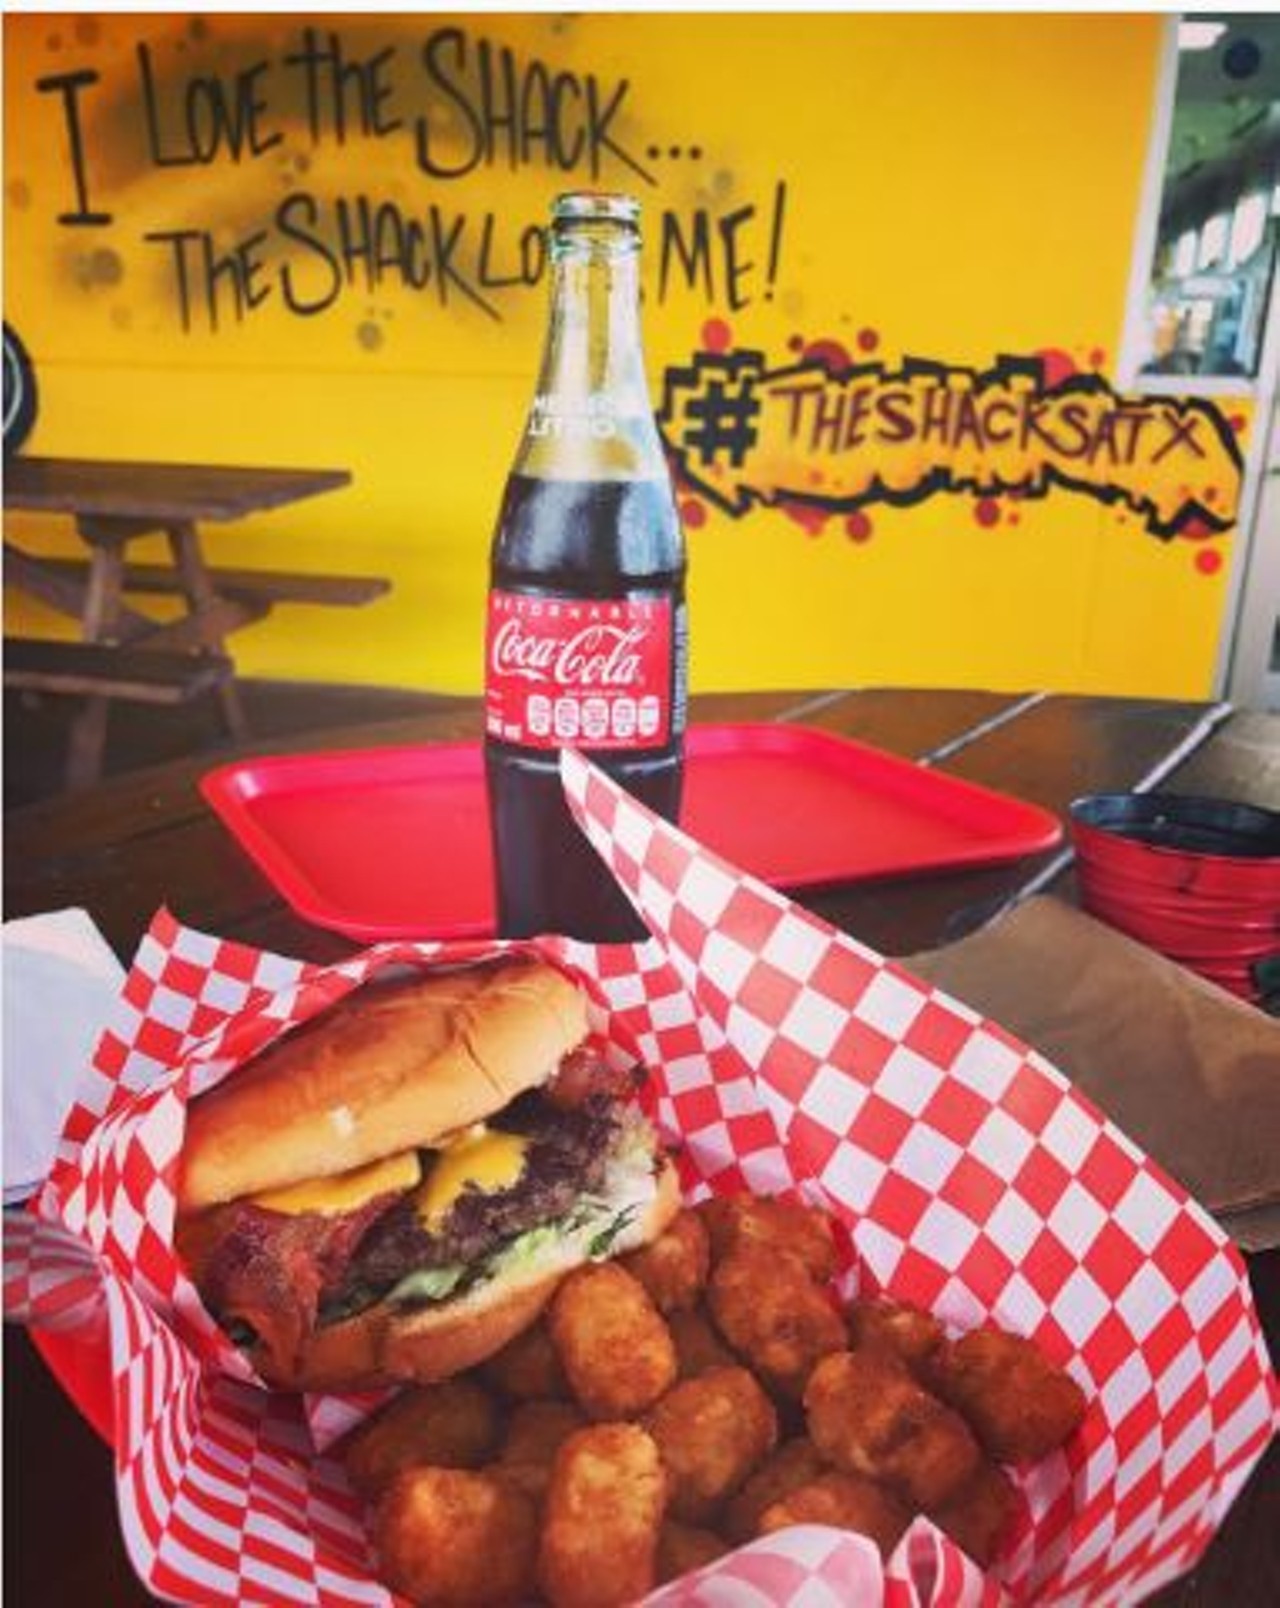 The Shack
6392 Babcock Rd, (210) 558-3660
Hamburguesas are never a bad idea at the The Shack. This place has everything, but you must try this lip-smacking burger.
Photo via Instagram
vjsatx
